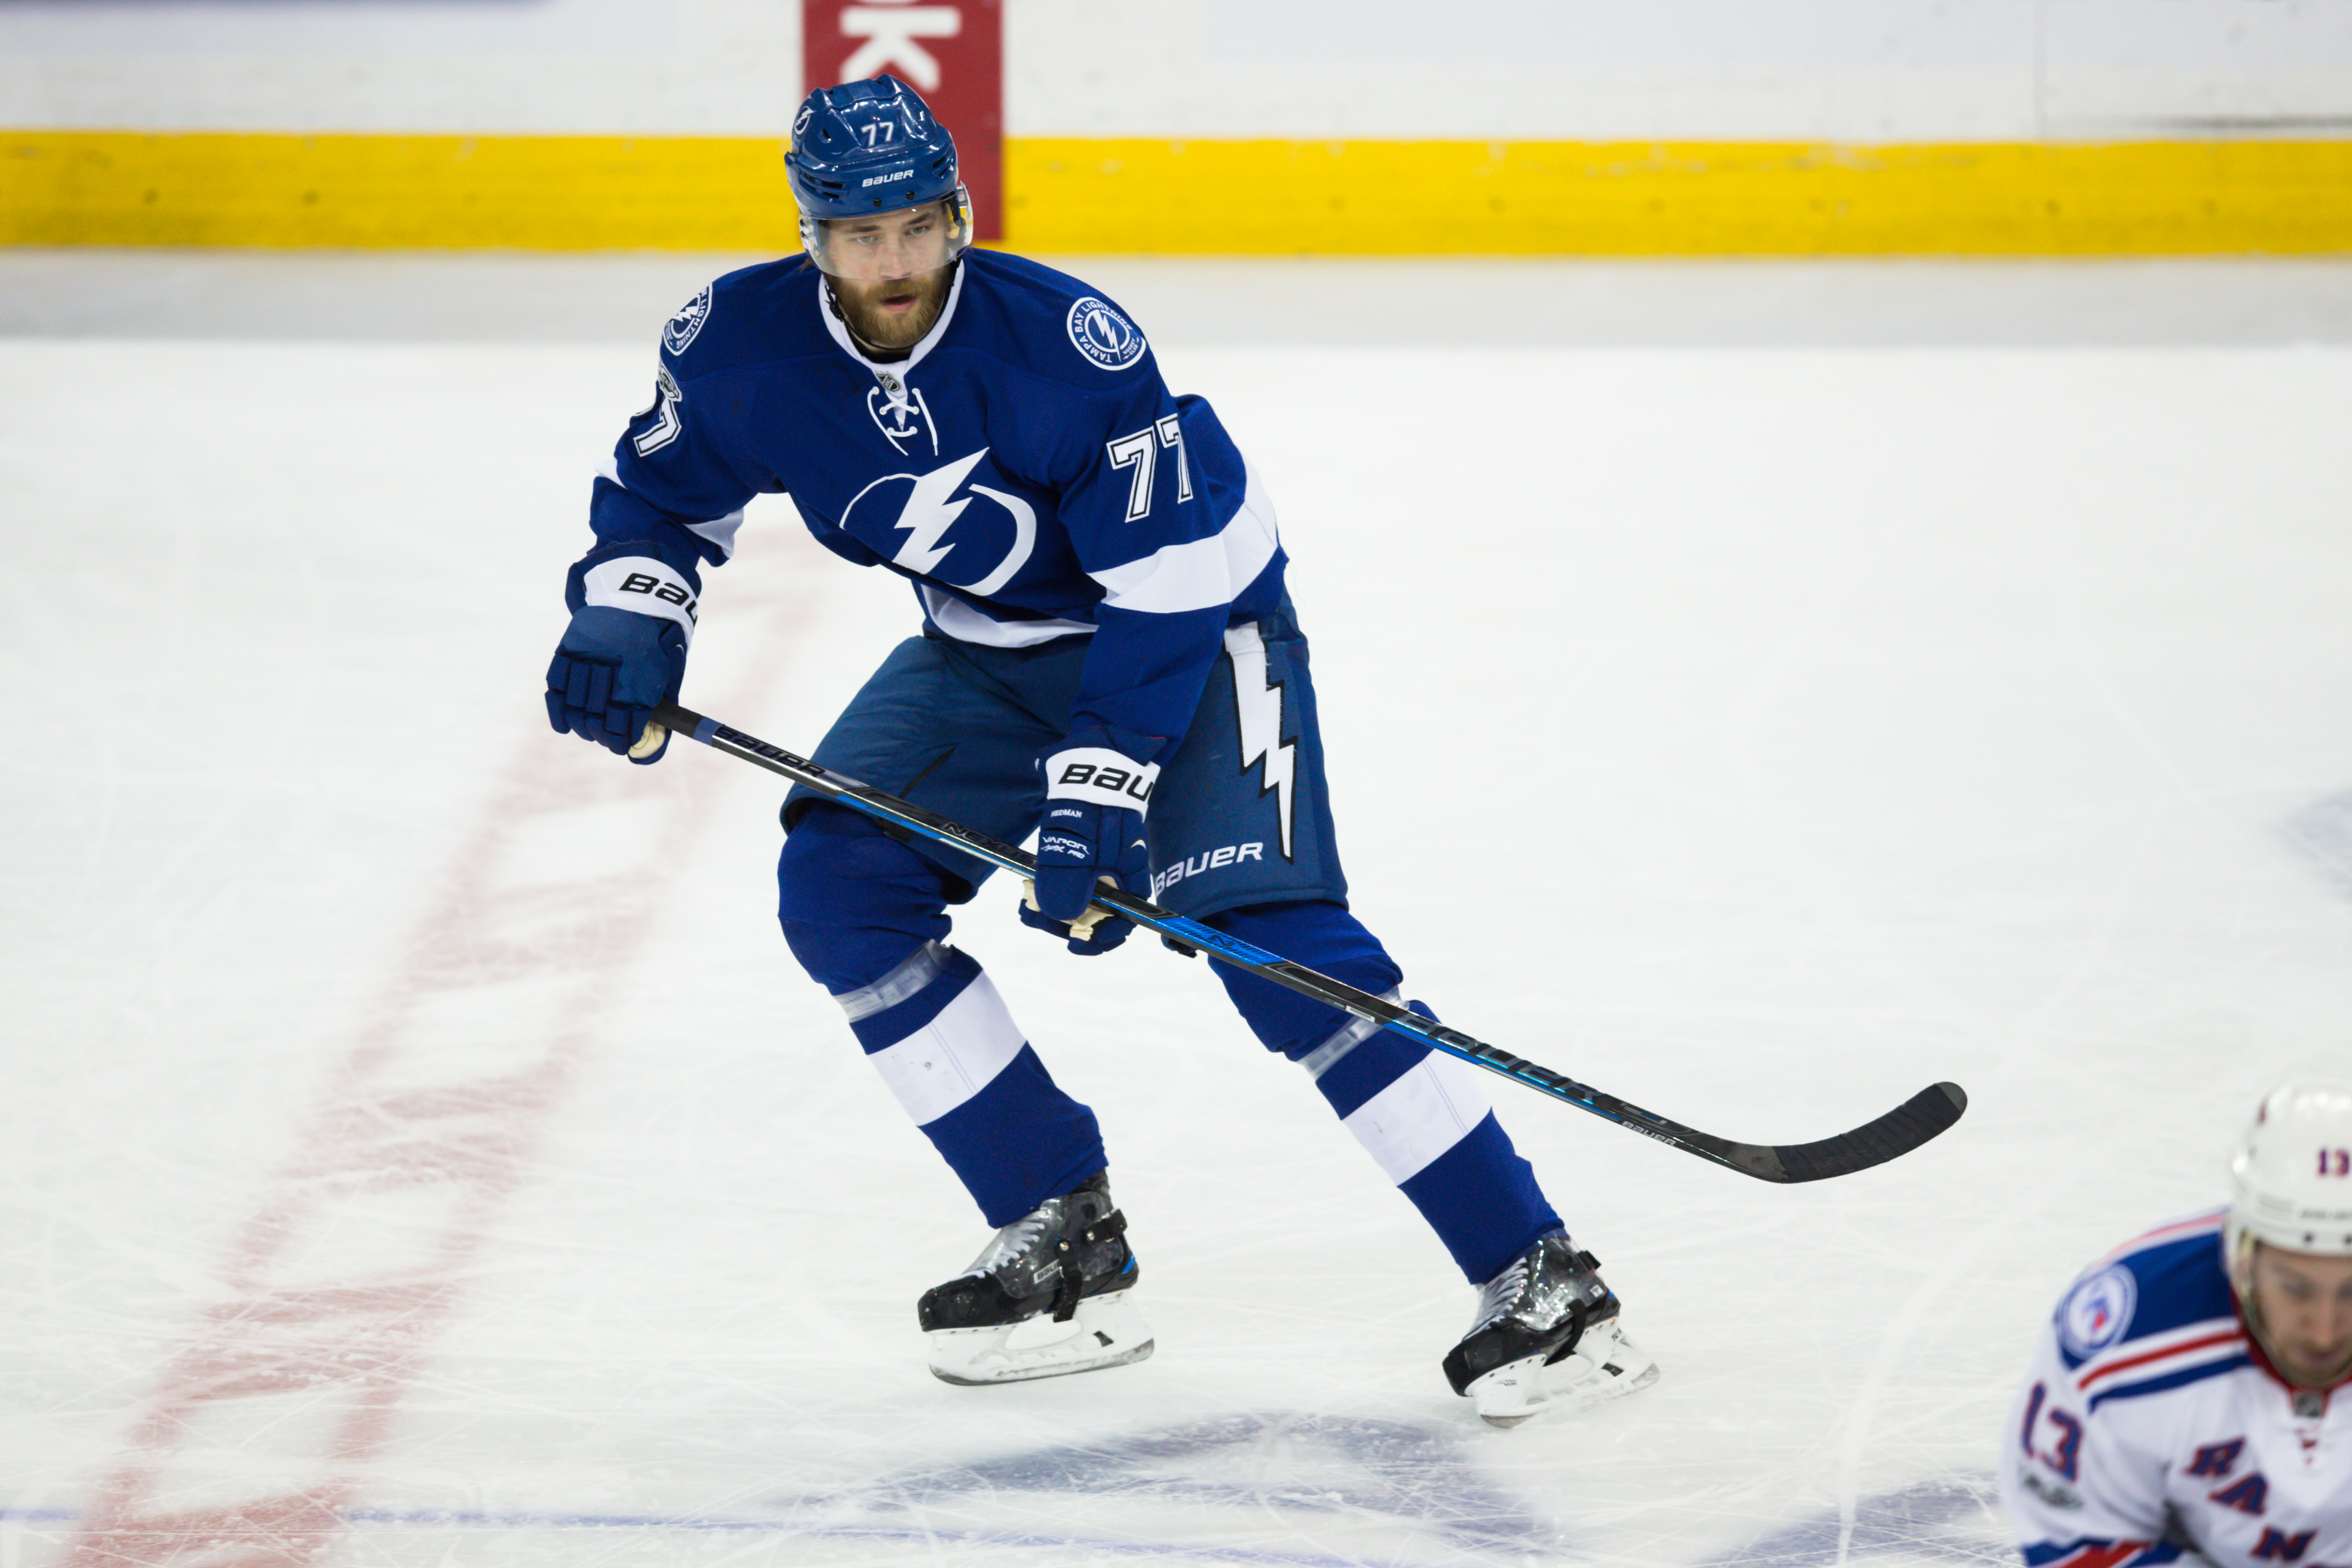 Hedman tied the game late, but Lightning lost./TRAVIS PENDERGRASS